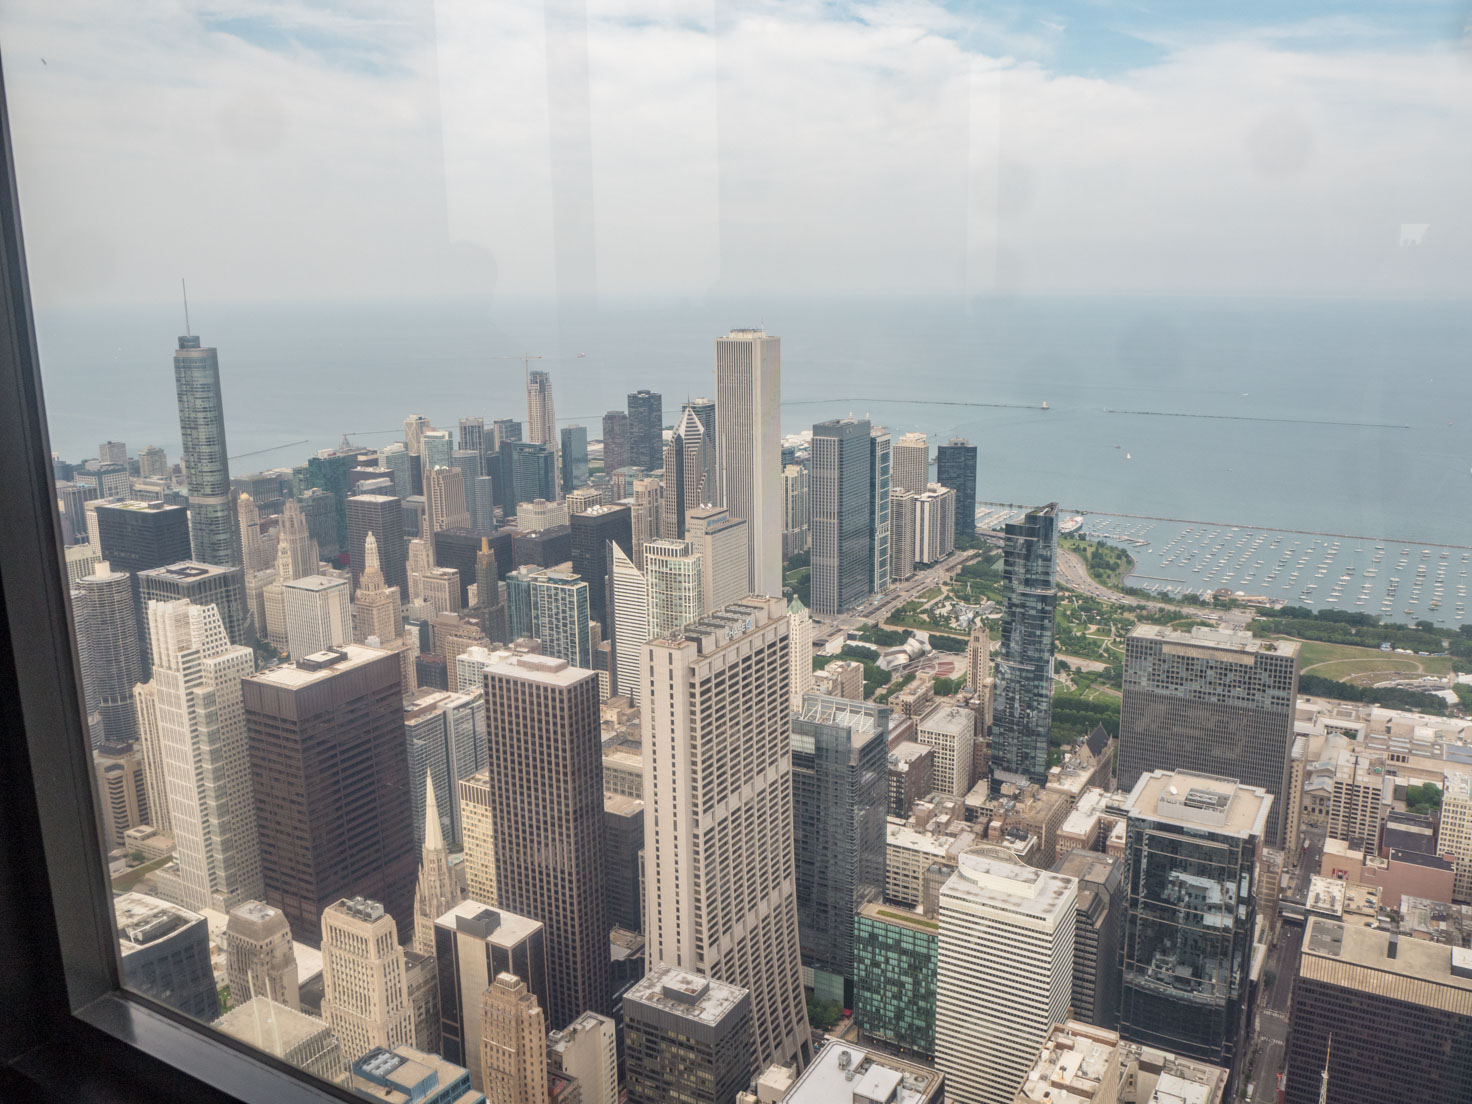 Skydeck at Willis Tower in Chicago view